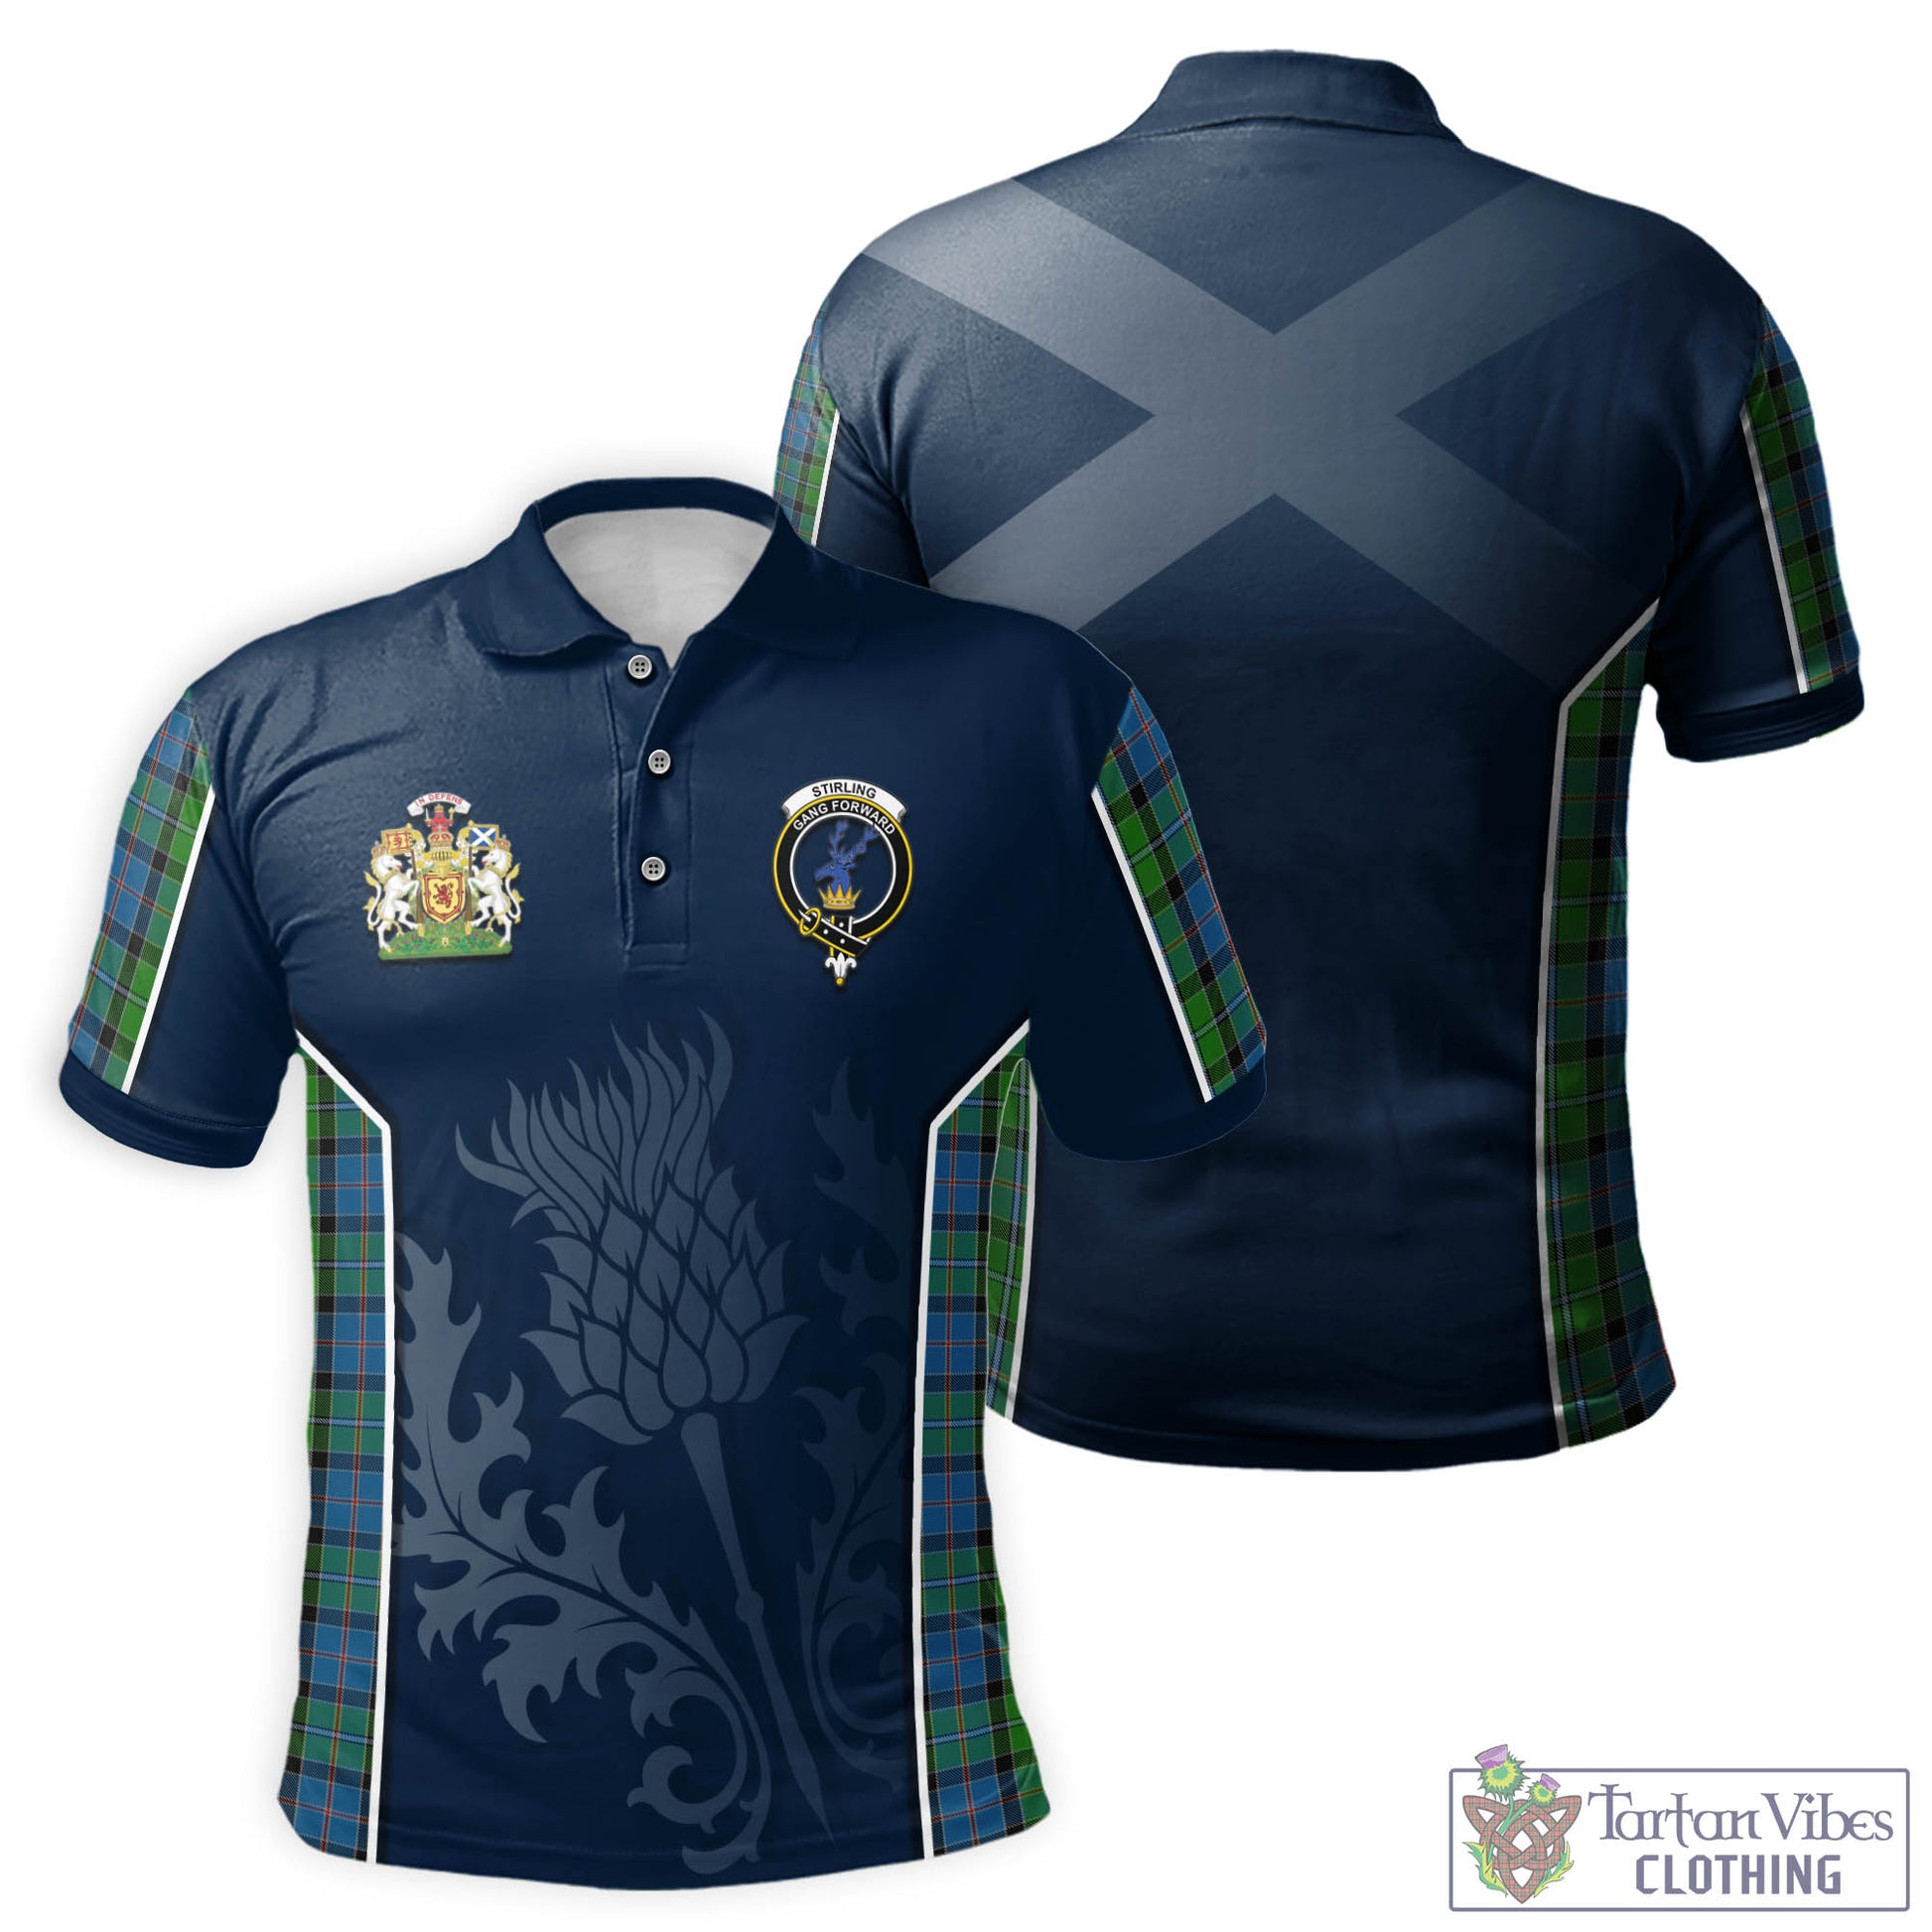 Tartan Vibes Clothing Stirling Tartan Men's Polo Shirt with Family Crest and Scottish Thistle Vibes Sport Style